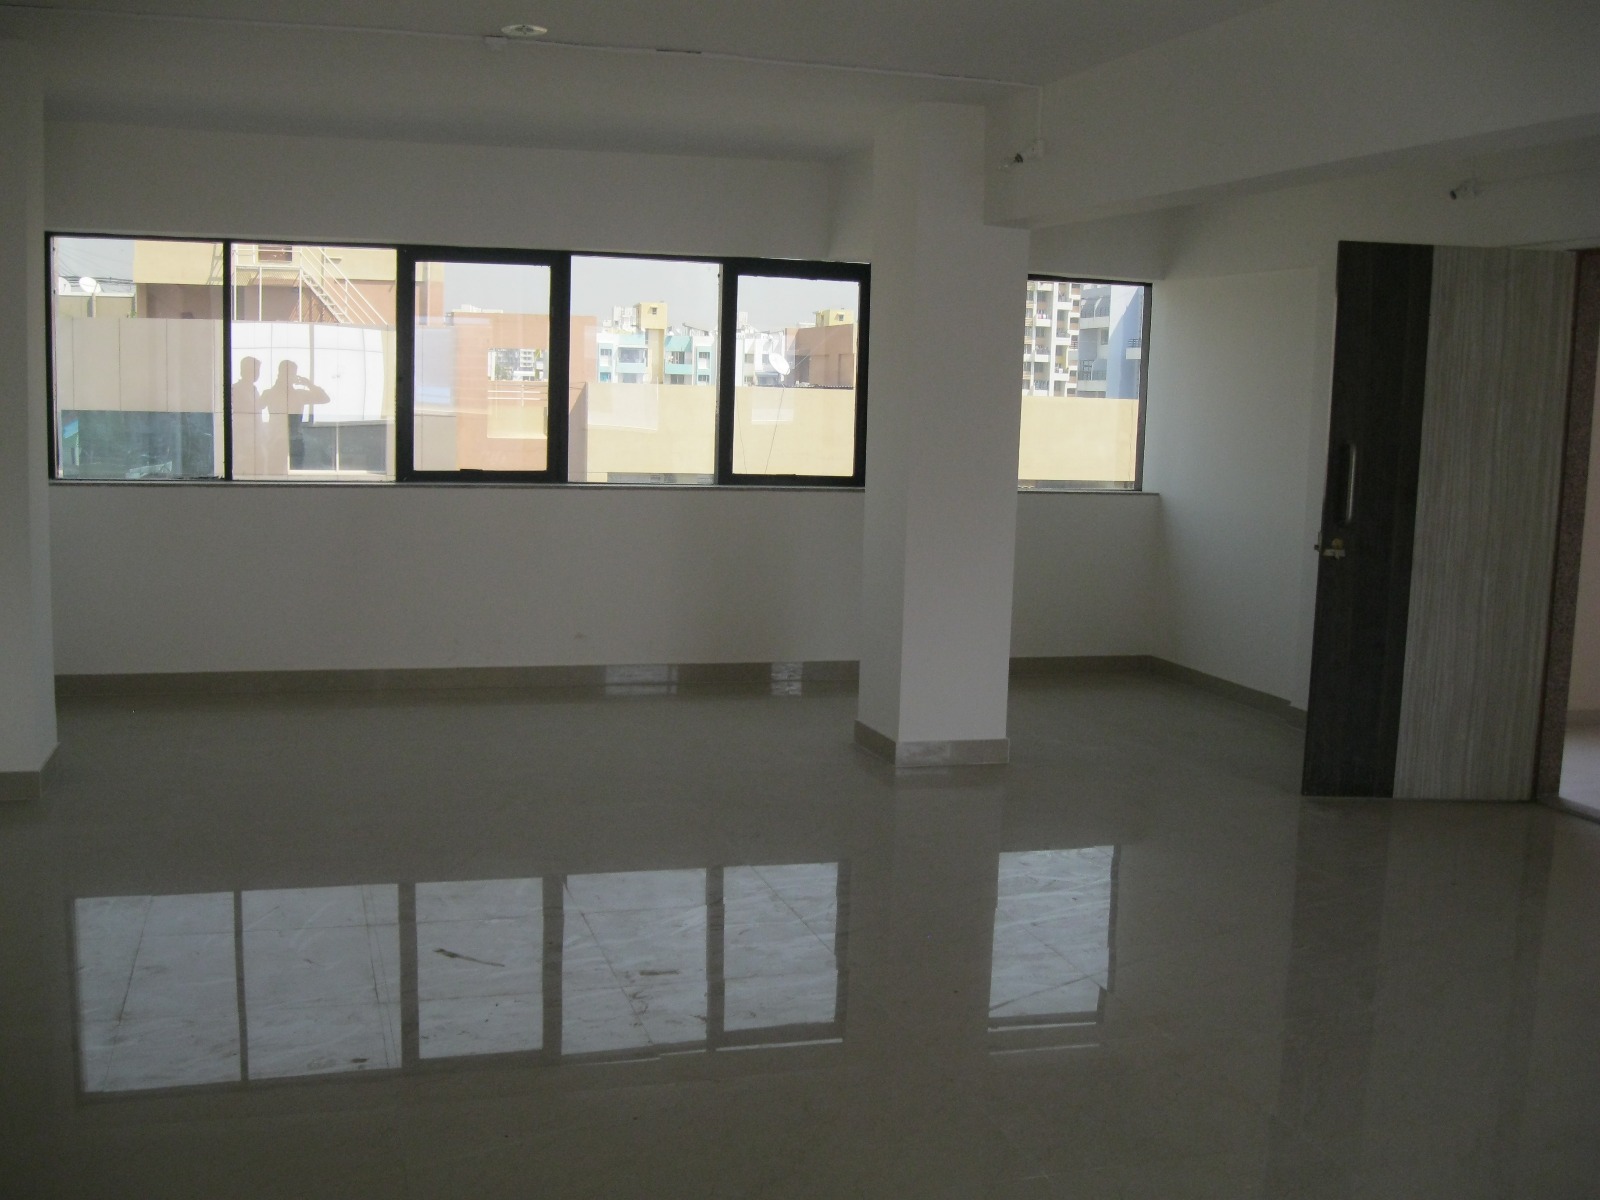 2000 Sq.Ft. UnFurnished Office/Space @ 90.00 Th for Rent/Lease in Wakad, 